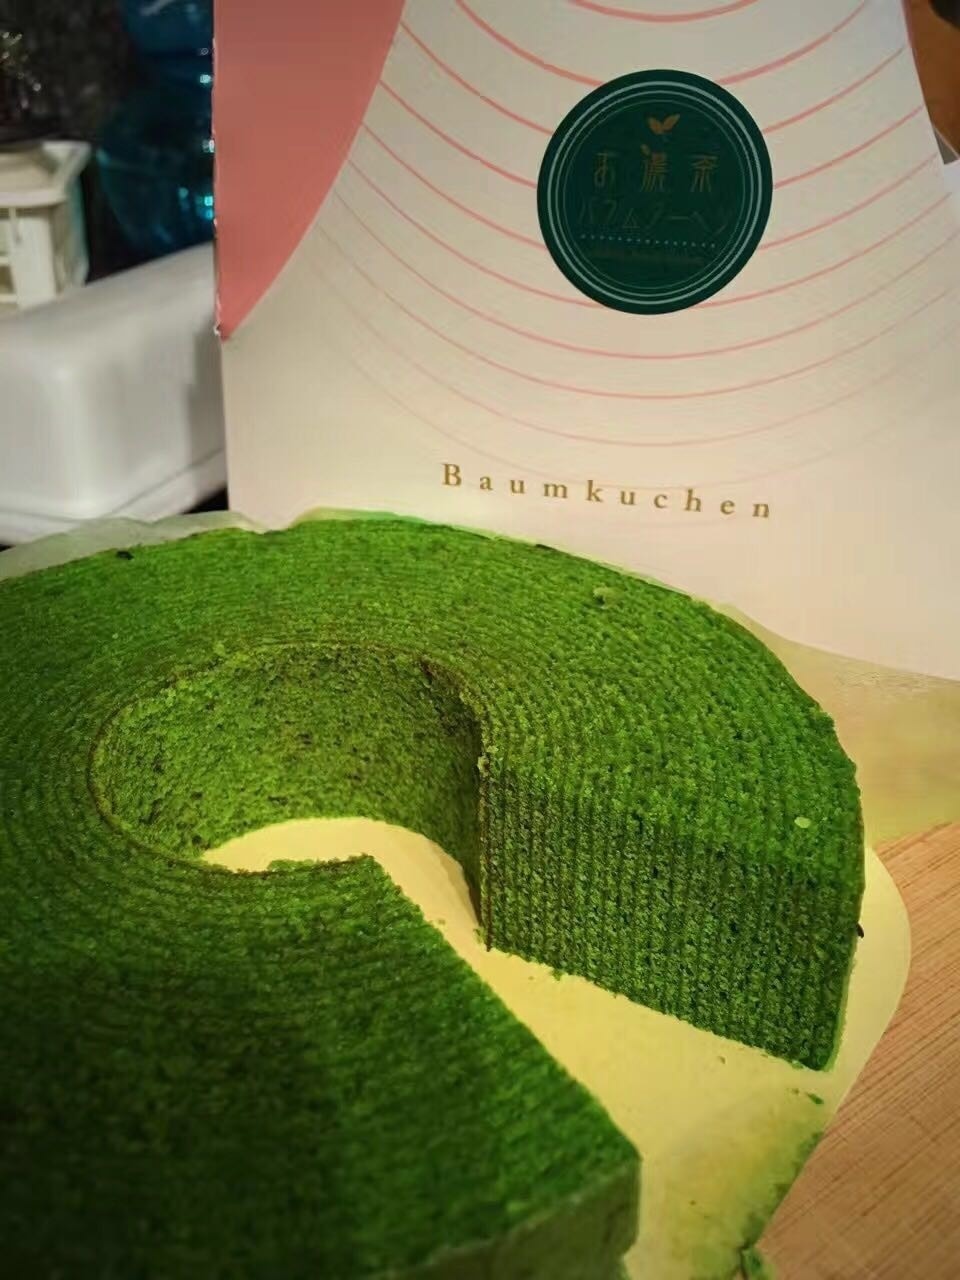 For Japanese sweet's lovers - Minamoto Kitchoan's Matcha Baumkuchen is a must try.

#LifeAtExpedia